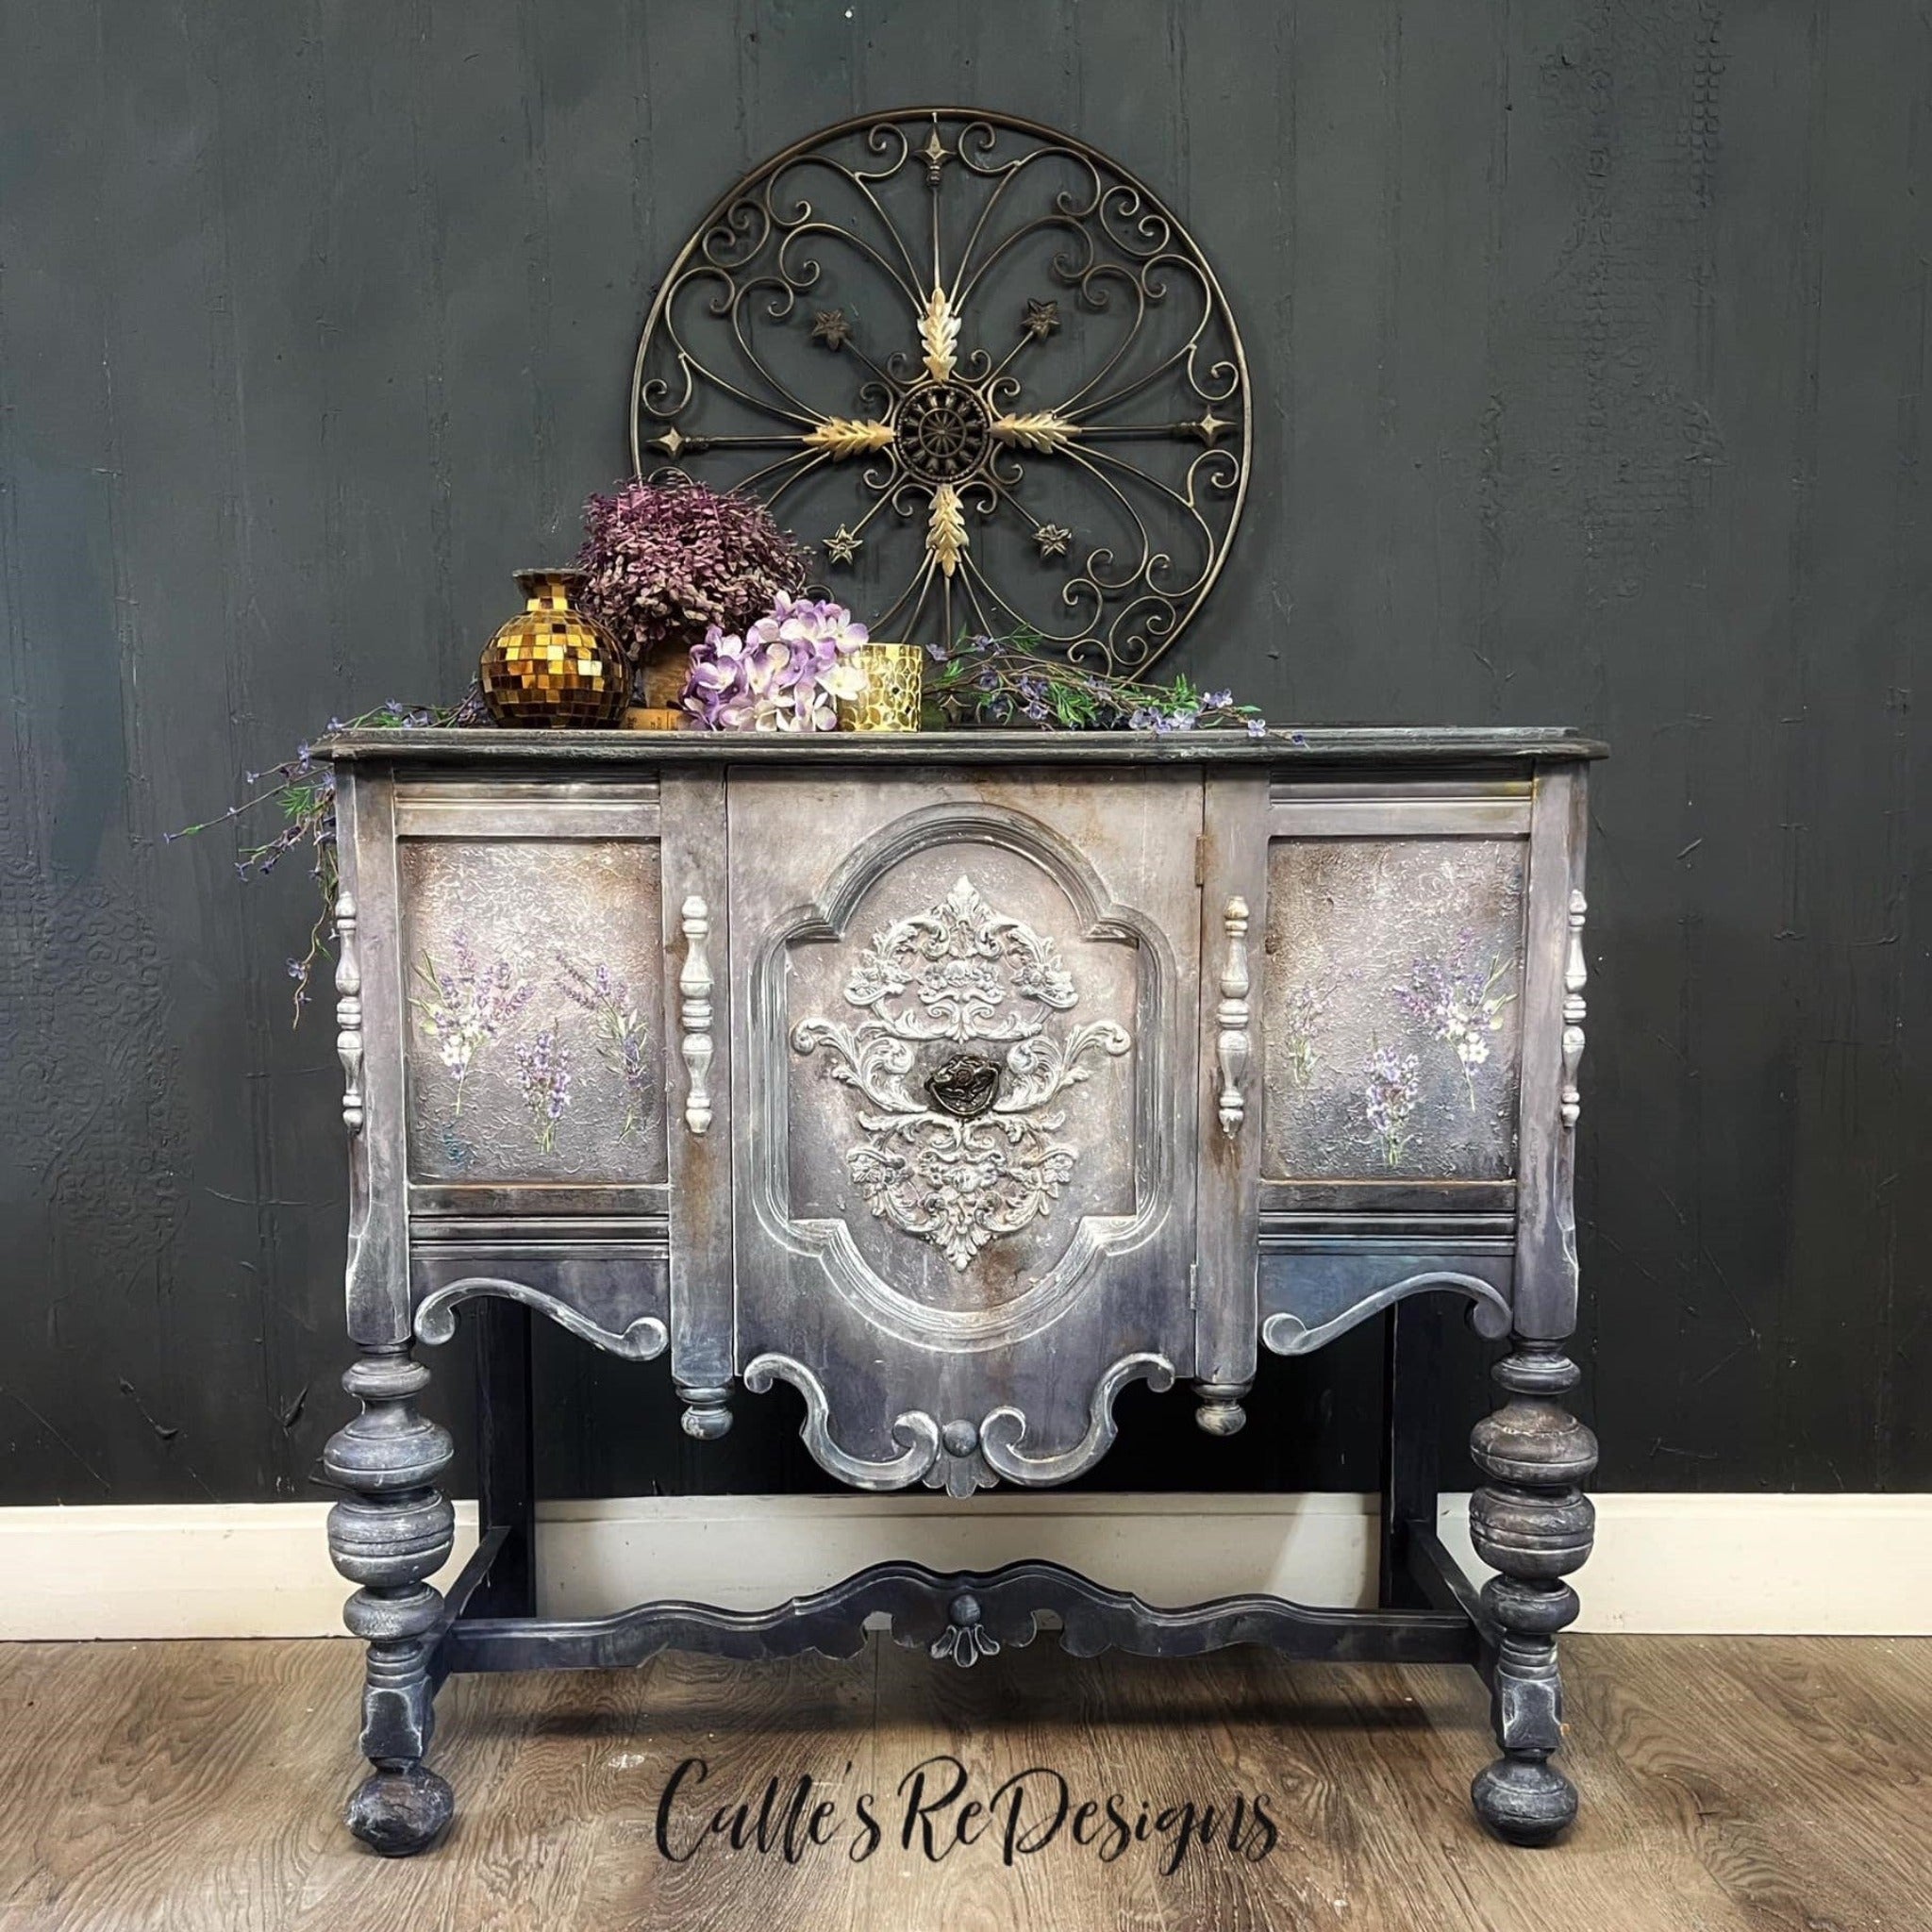 A small buffet table refubished by Calle's ReDesigns is painted an ombre blend of light grey down to dark grey and features ReDesign with Prima's Lavender Bunch small transfer on its 2 doors.